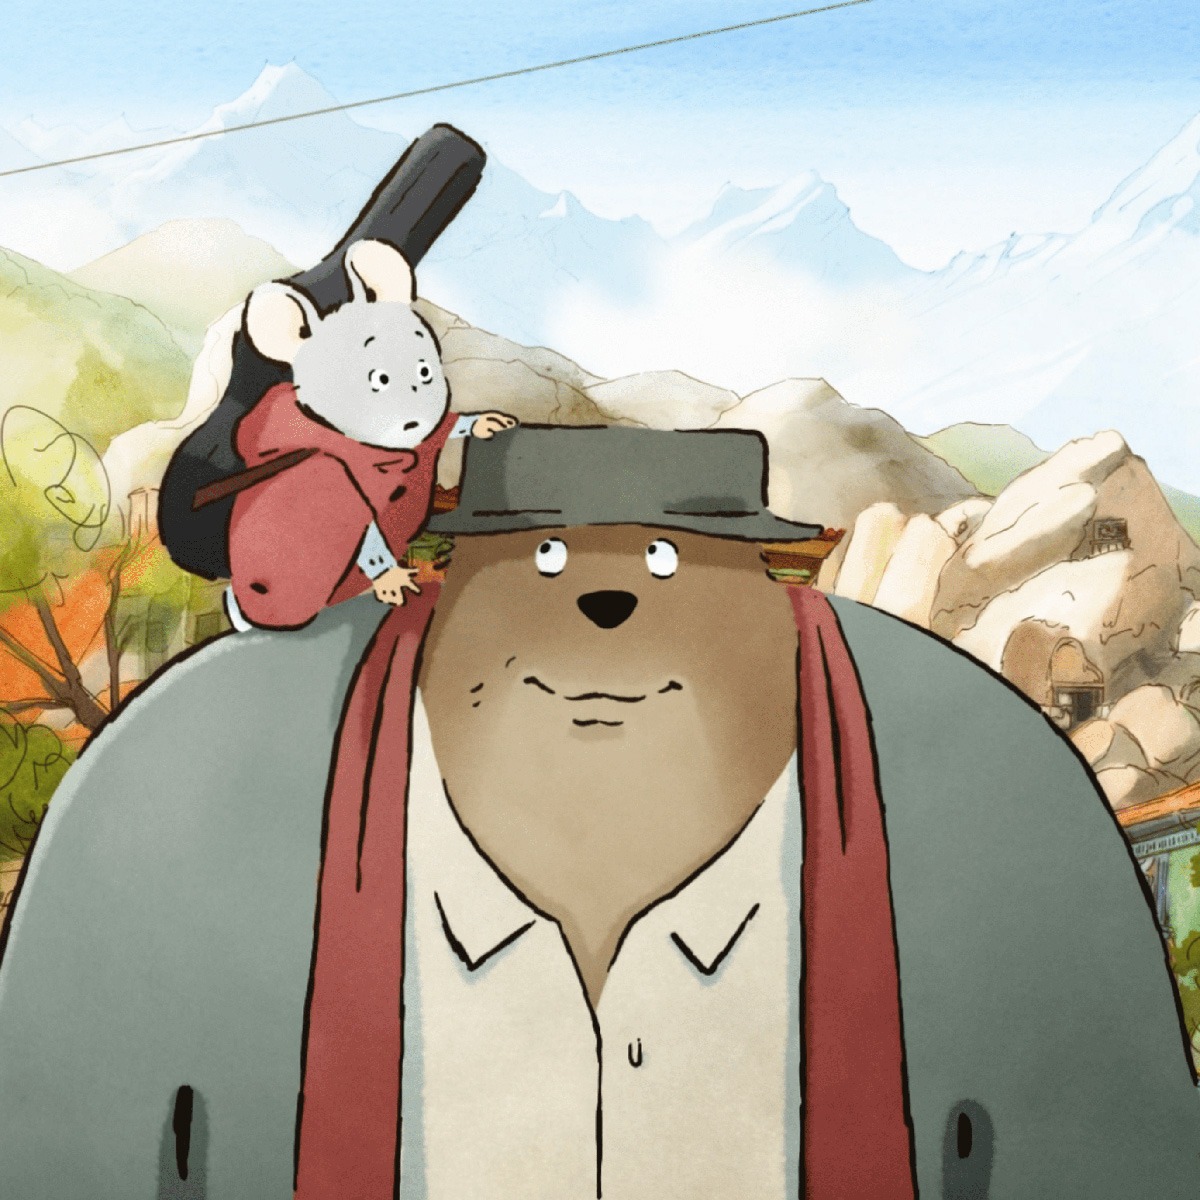 a mouse wearing a red poncho and a guitar case around his back stands on the shoulder of a bear wearing a hat and clothes.